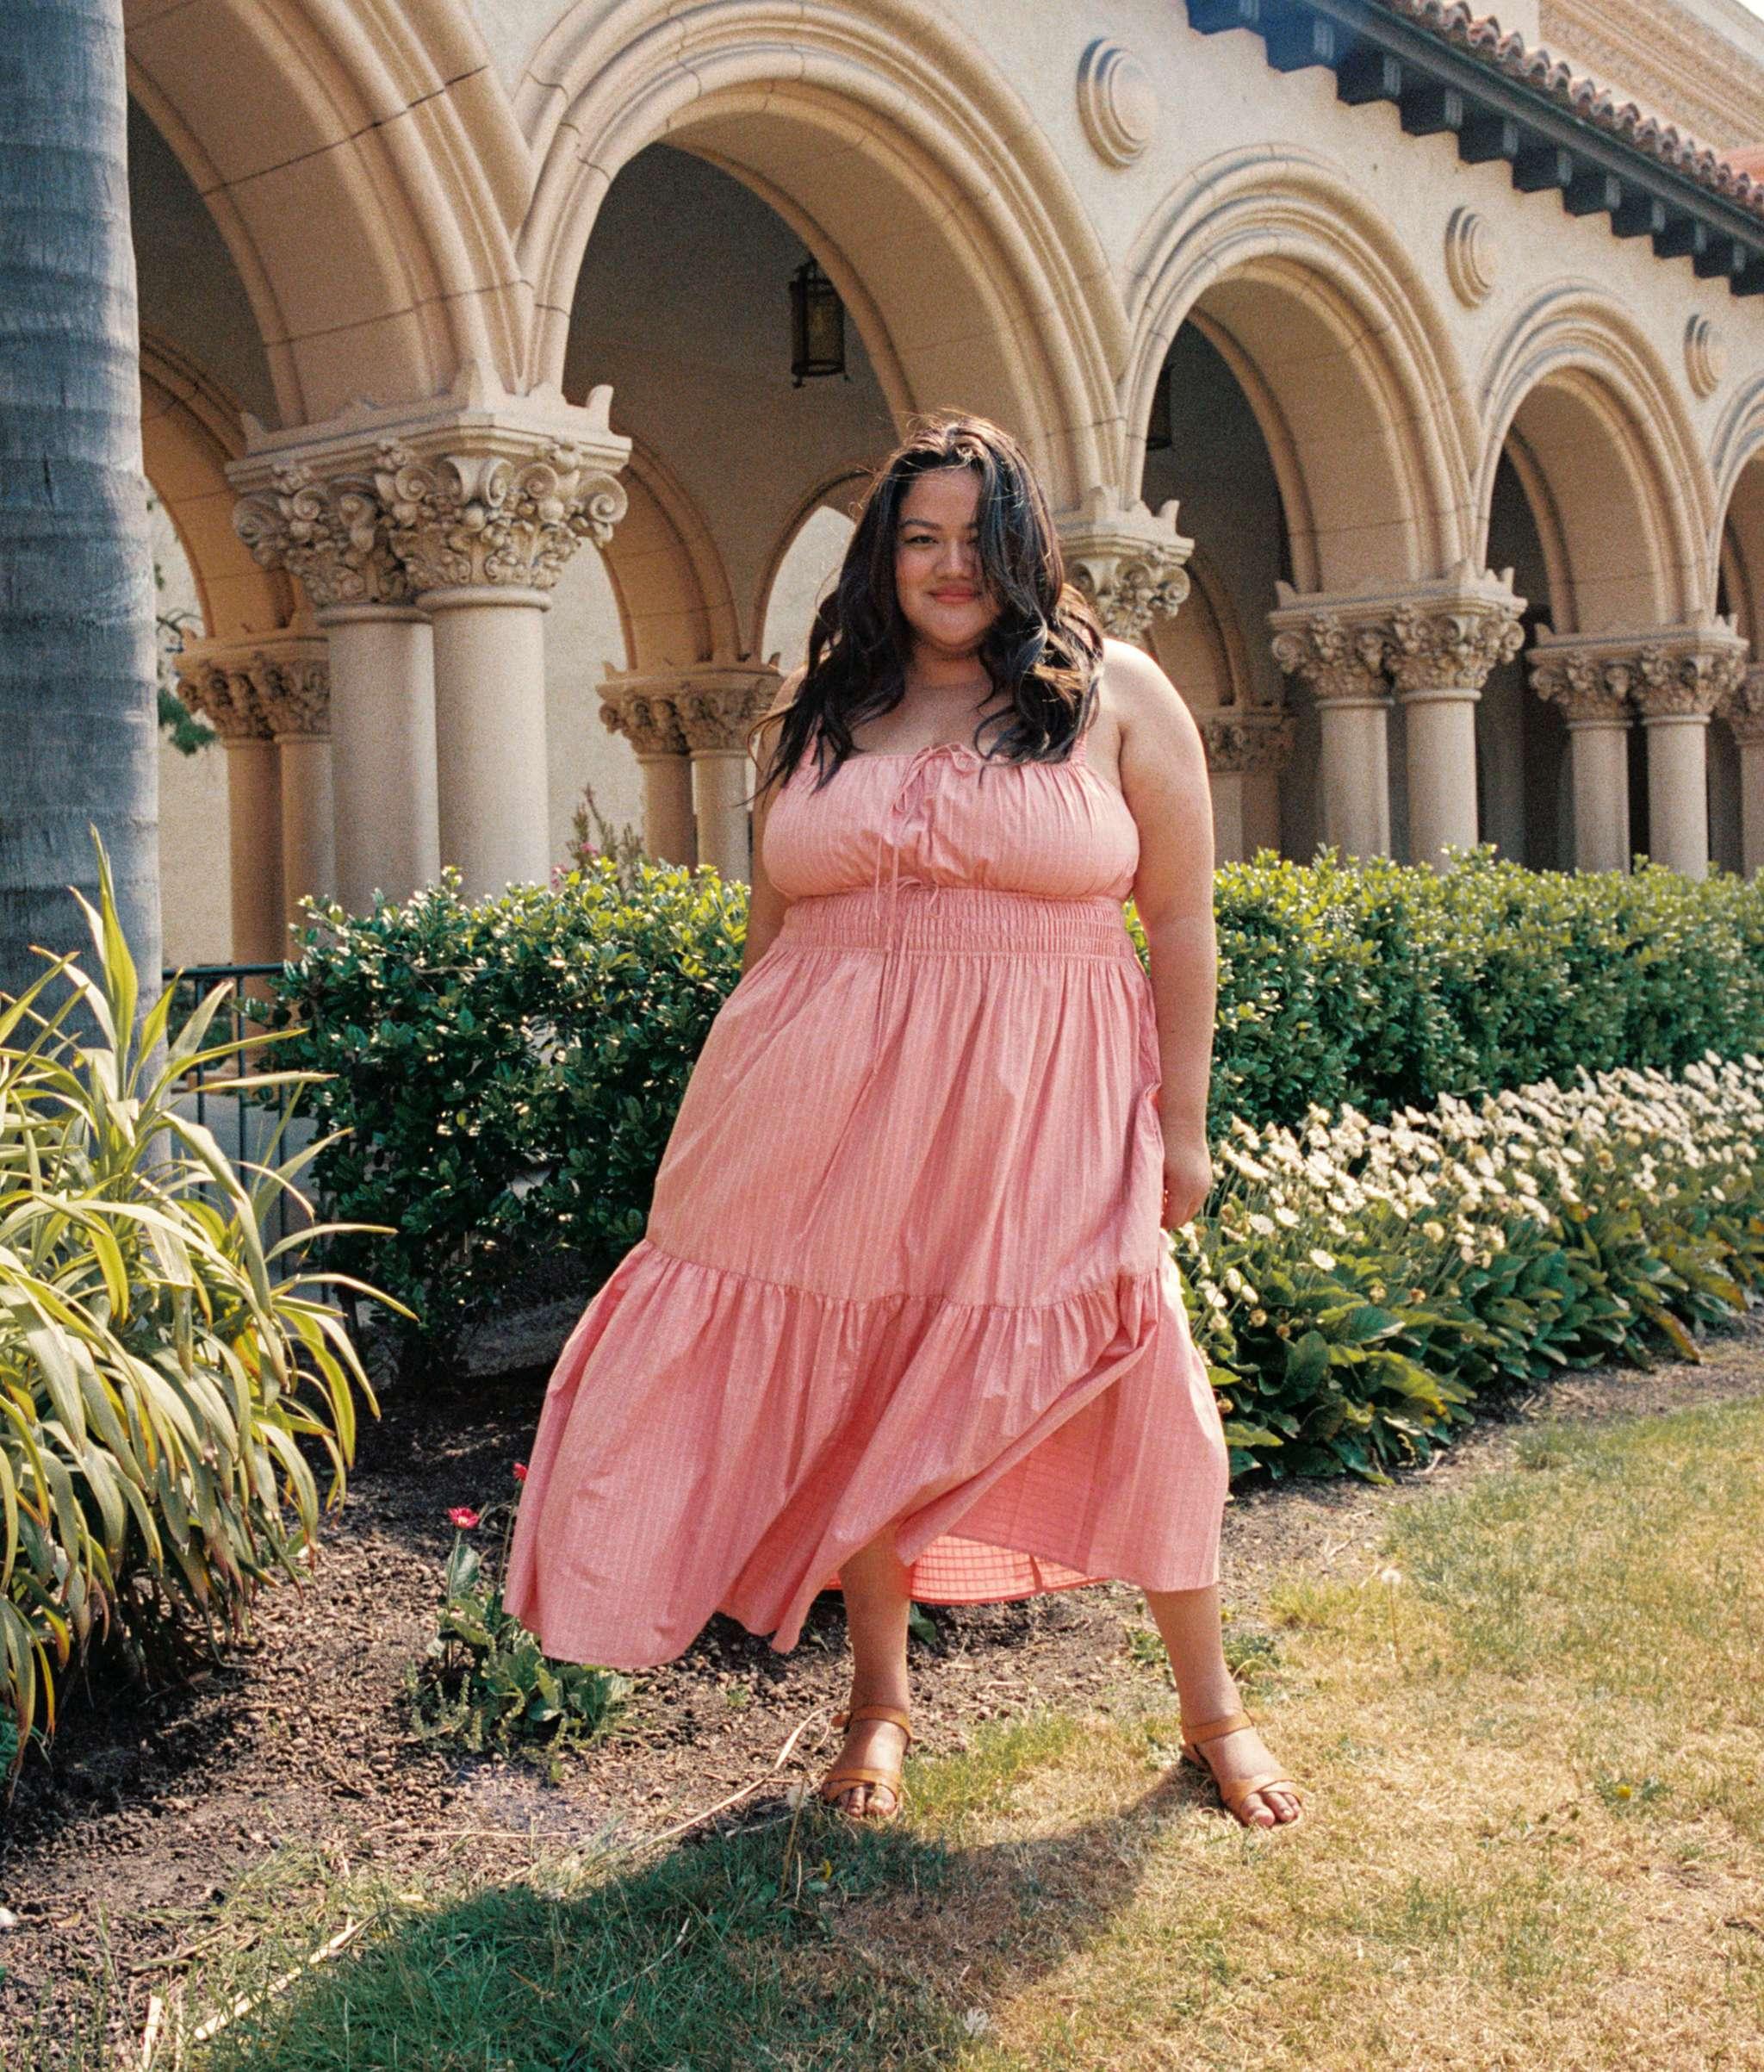 A model stands outside in a flowy pink dress.